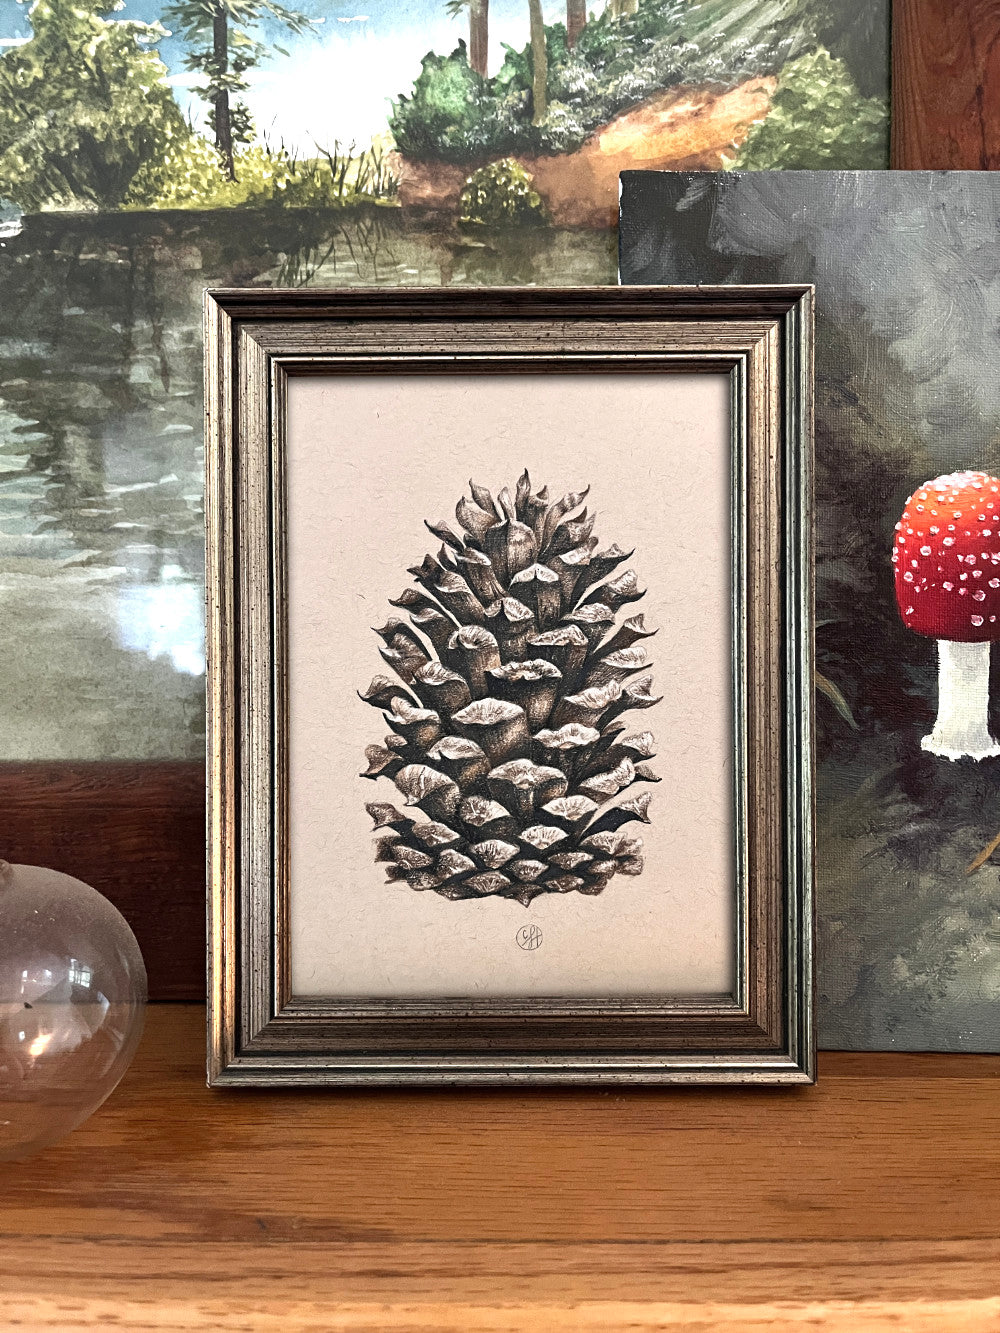 pinecone artwork, framed, on a mantle with other nature art surrounding it.